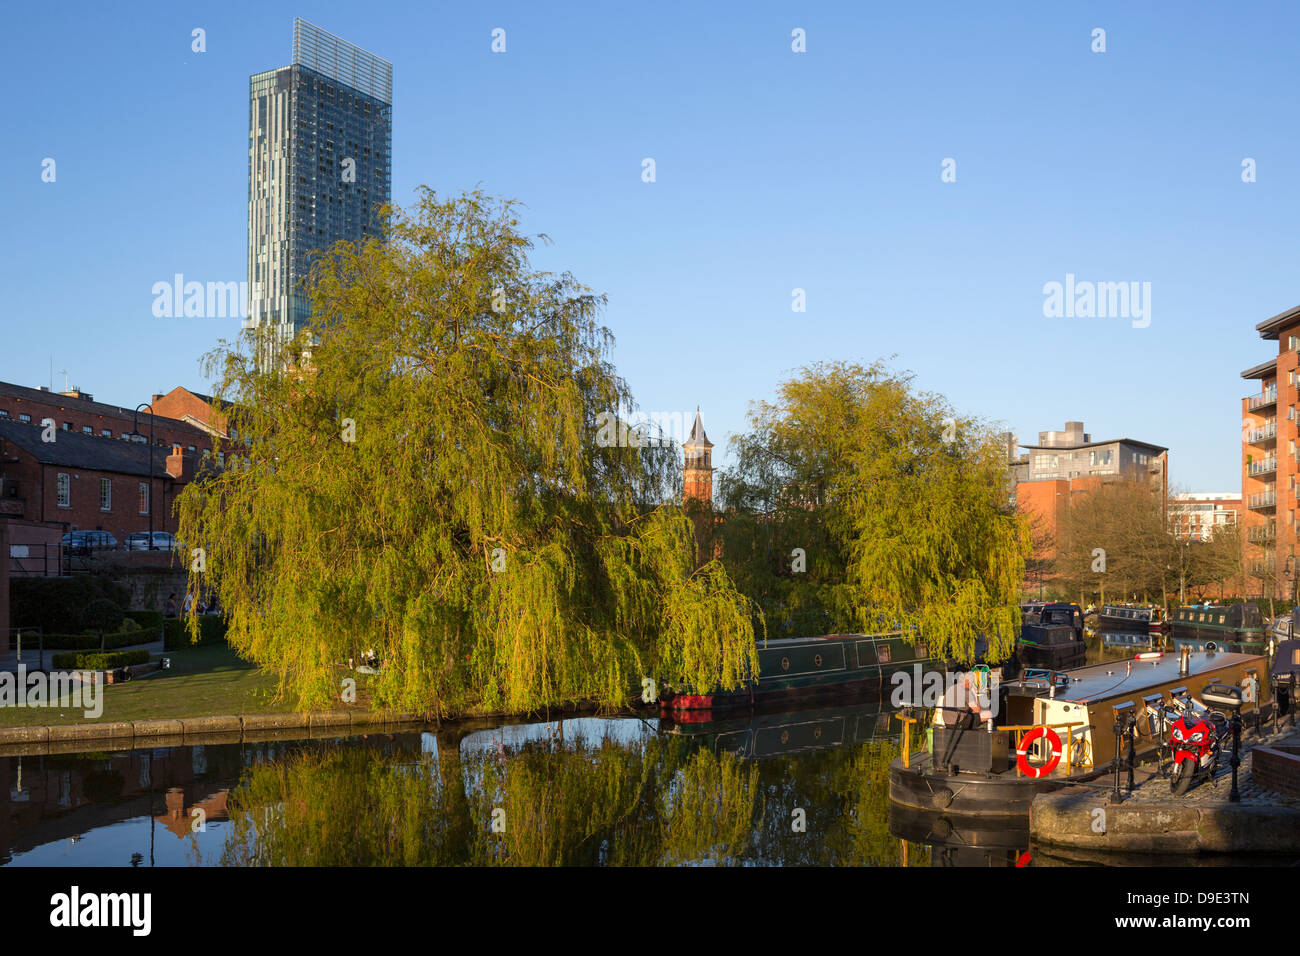 Uk, Manchester, Castlefield, Bridgewater Canal and Beetham tower Stock Photo